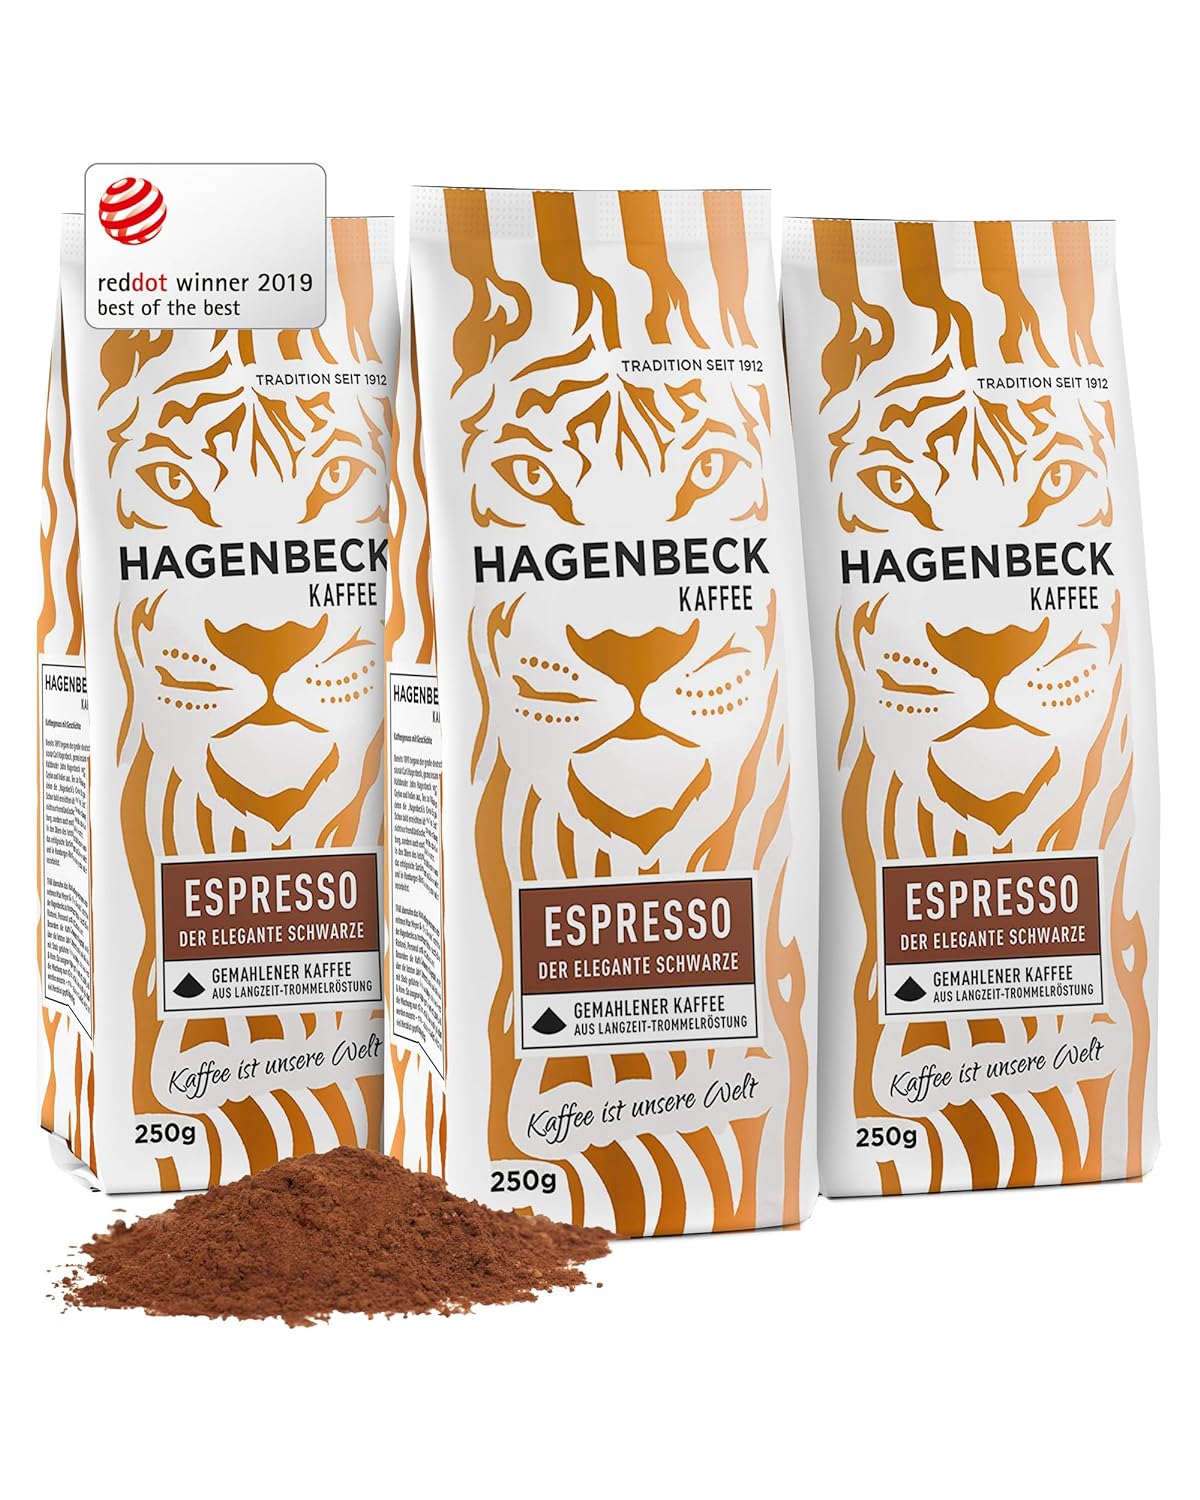 Hagenbeck Espresso 3x250g (750g) | Ground coffee from traditional roasting | Strong, spicy taste with a soft chocolaty note | Ground Coffee Beans | Ideal for fully automatic coffee machines
